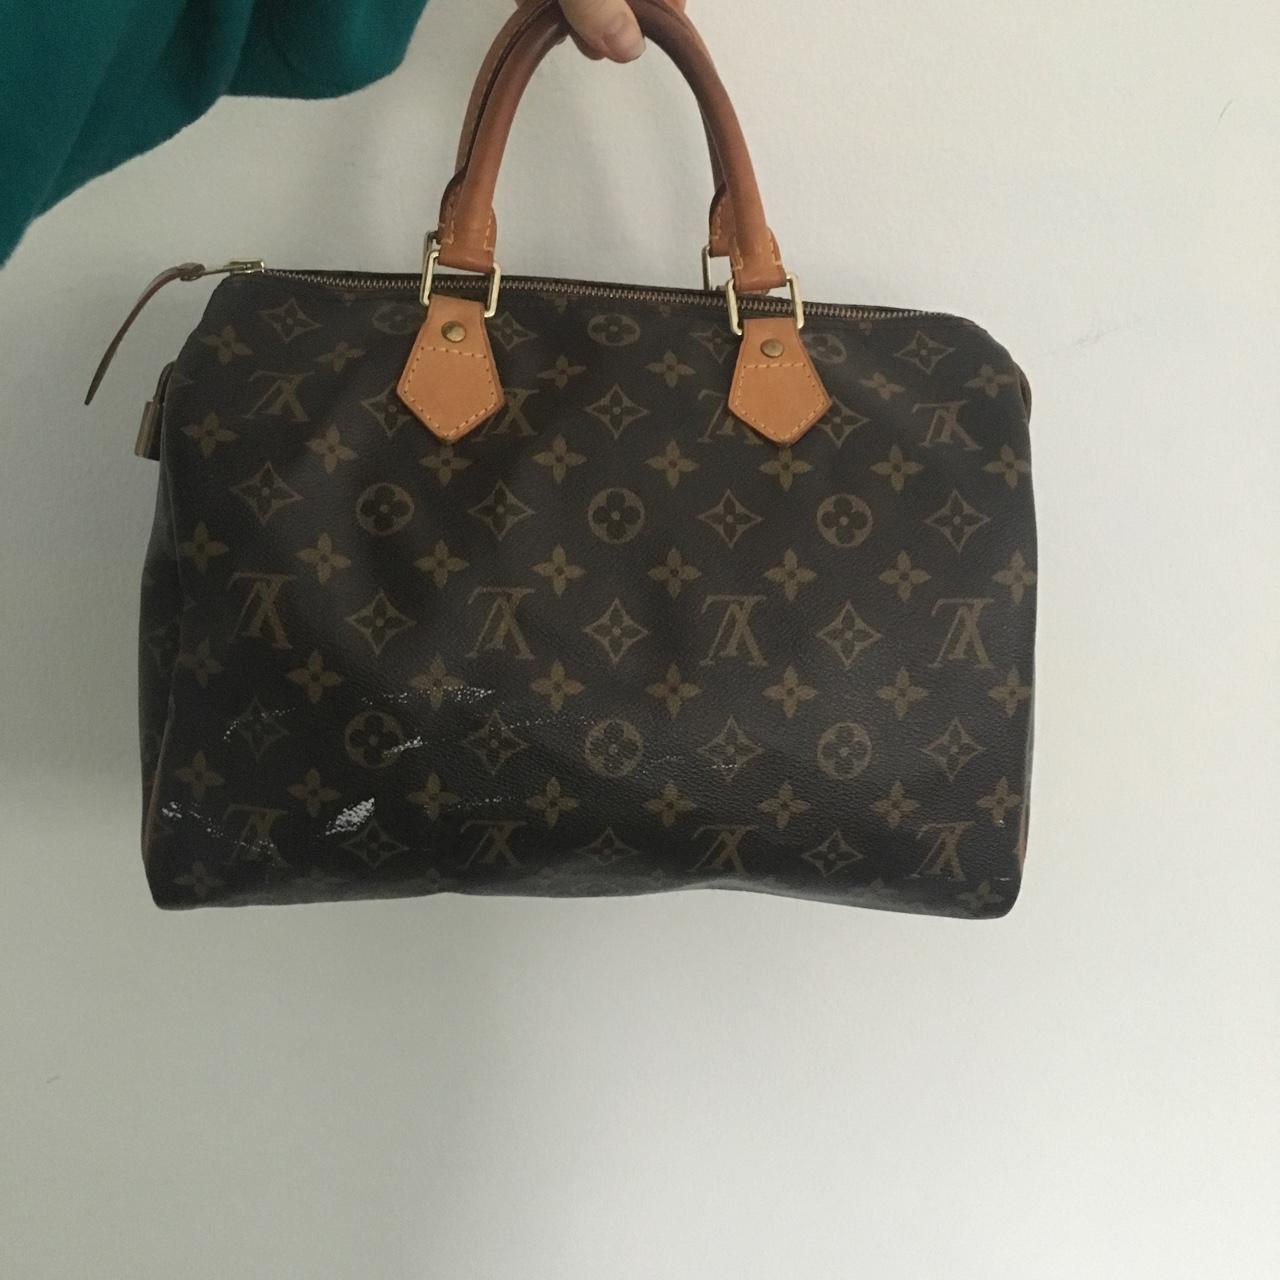 My first LV! So excited for the vachetta to patina 😍 speedy 25 in